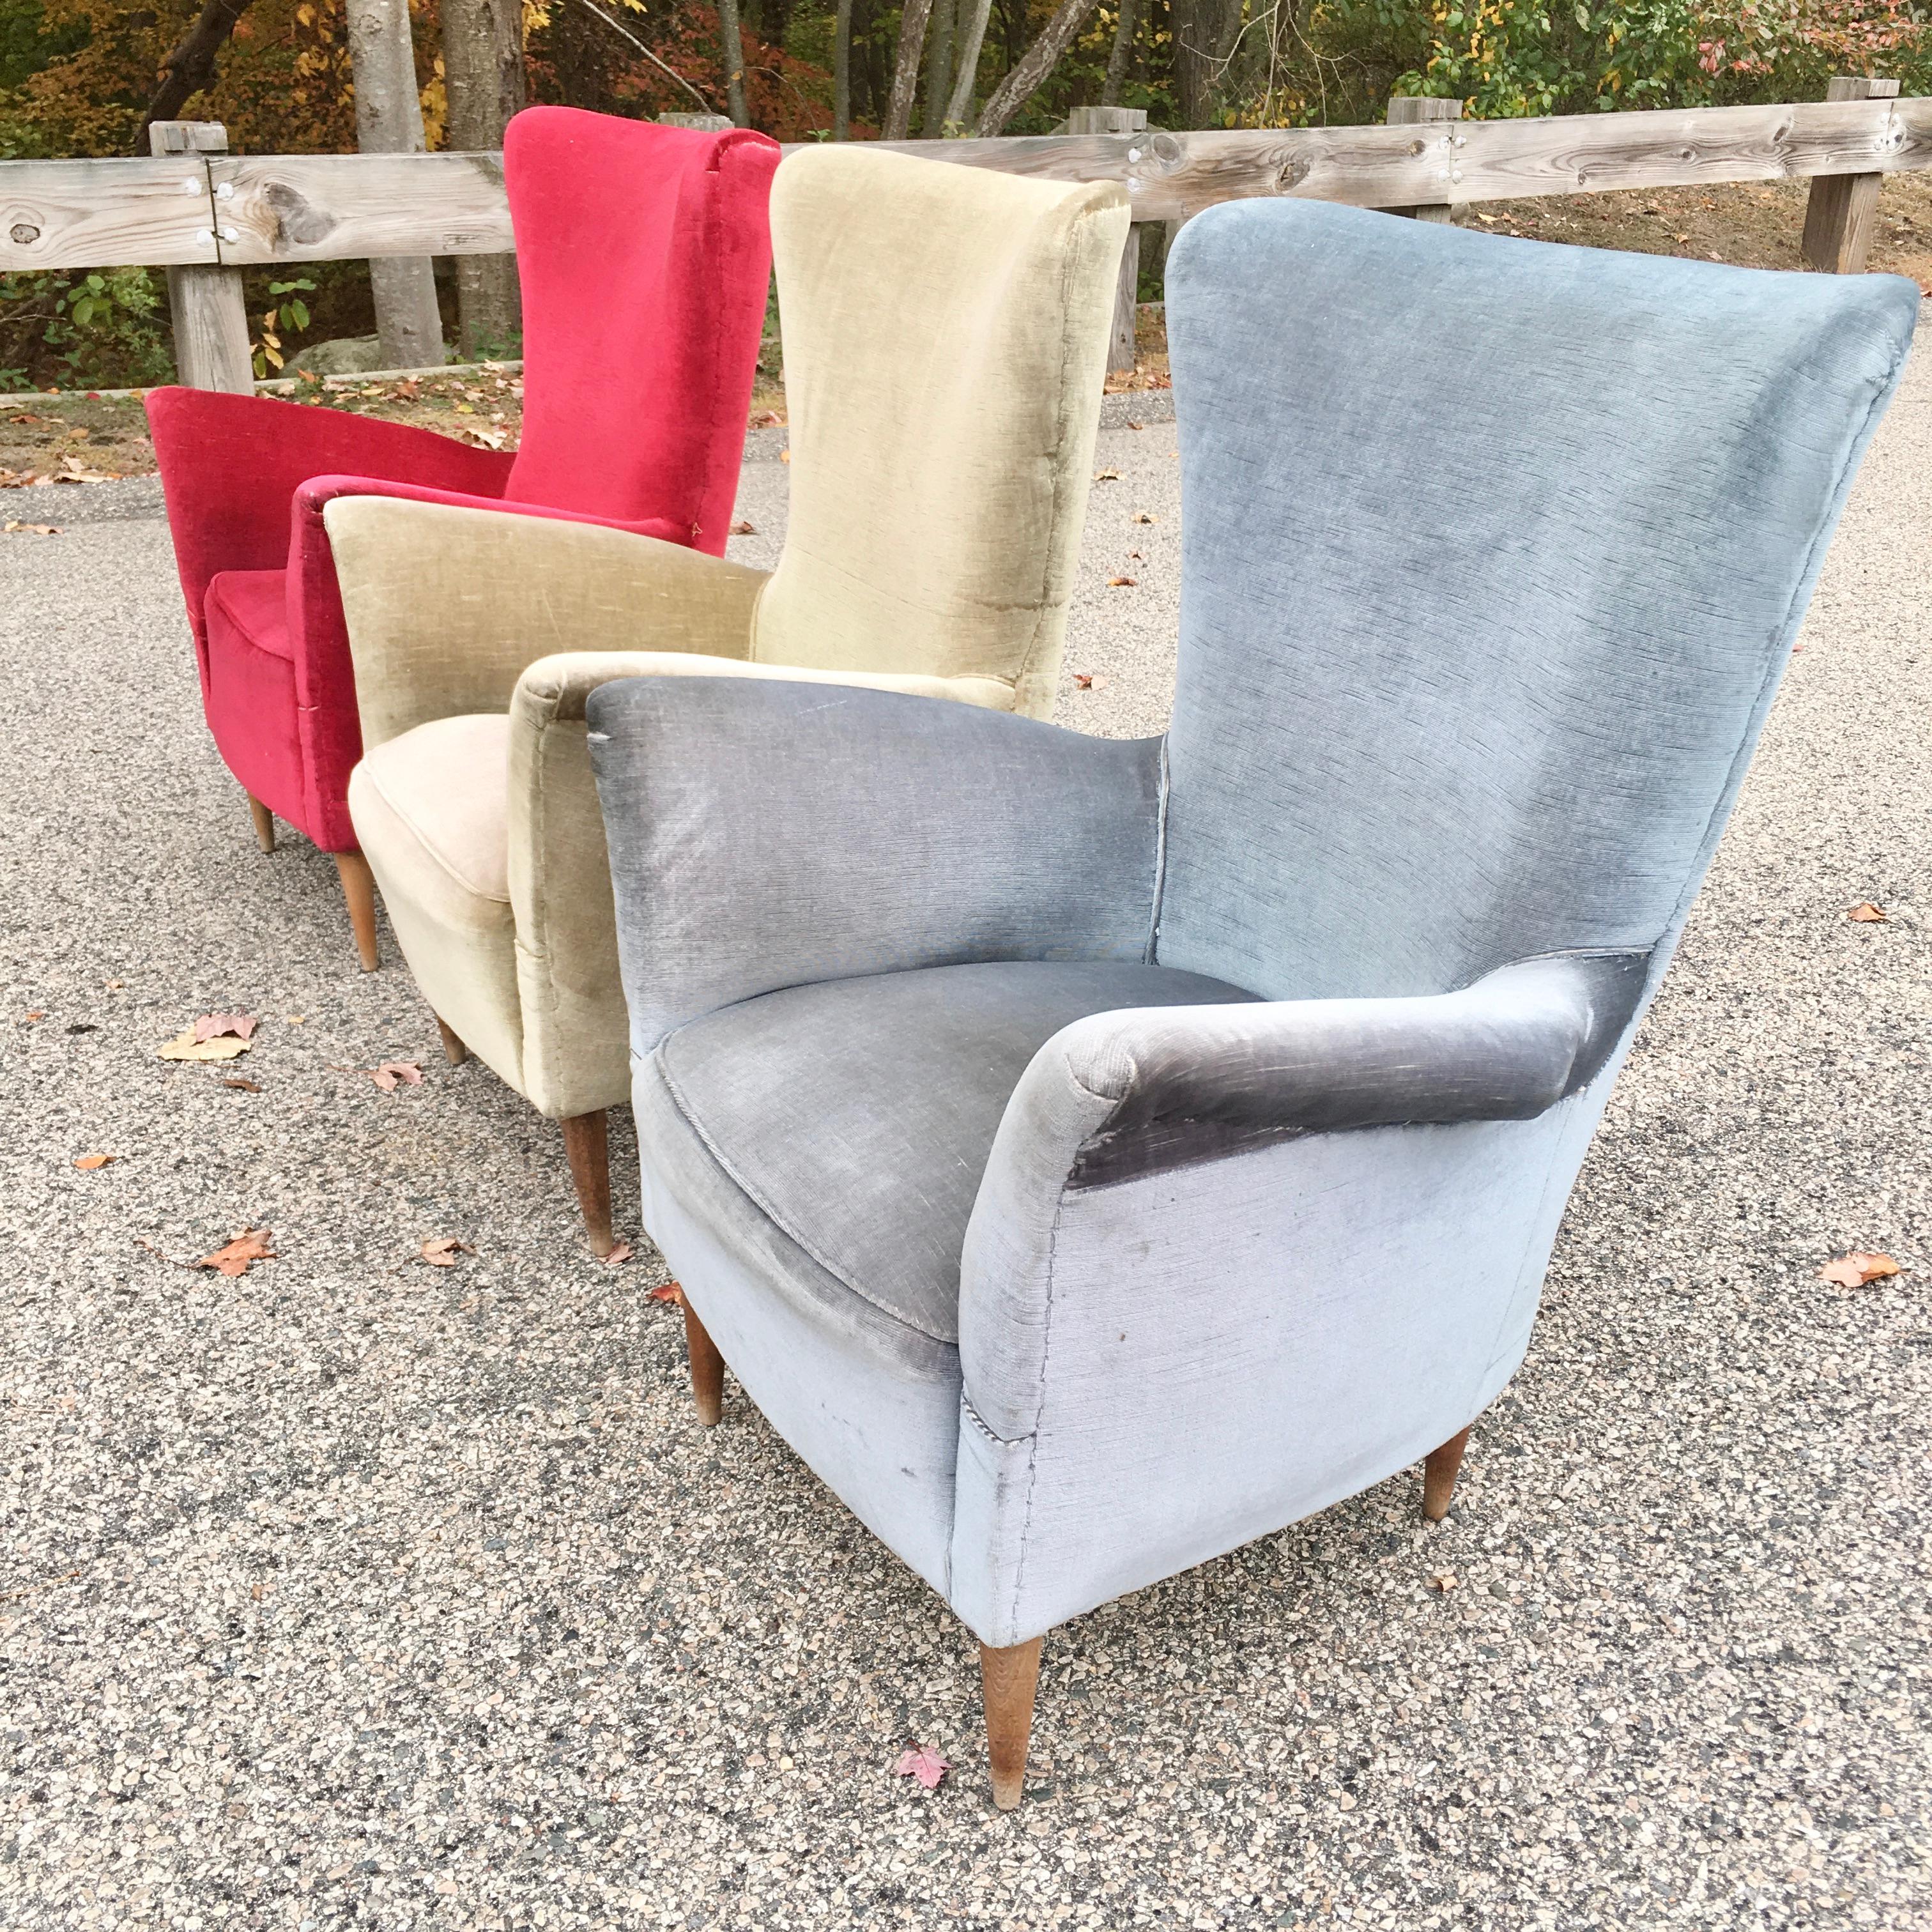 1950s Italian Lounge Chairs for Reupholstering In Fair Condition For Sale In Hanover, MA